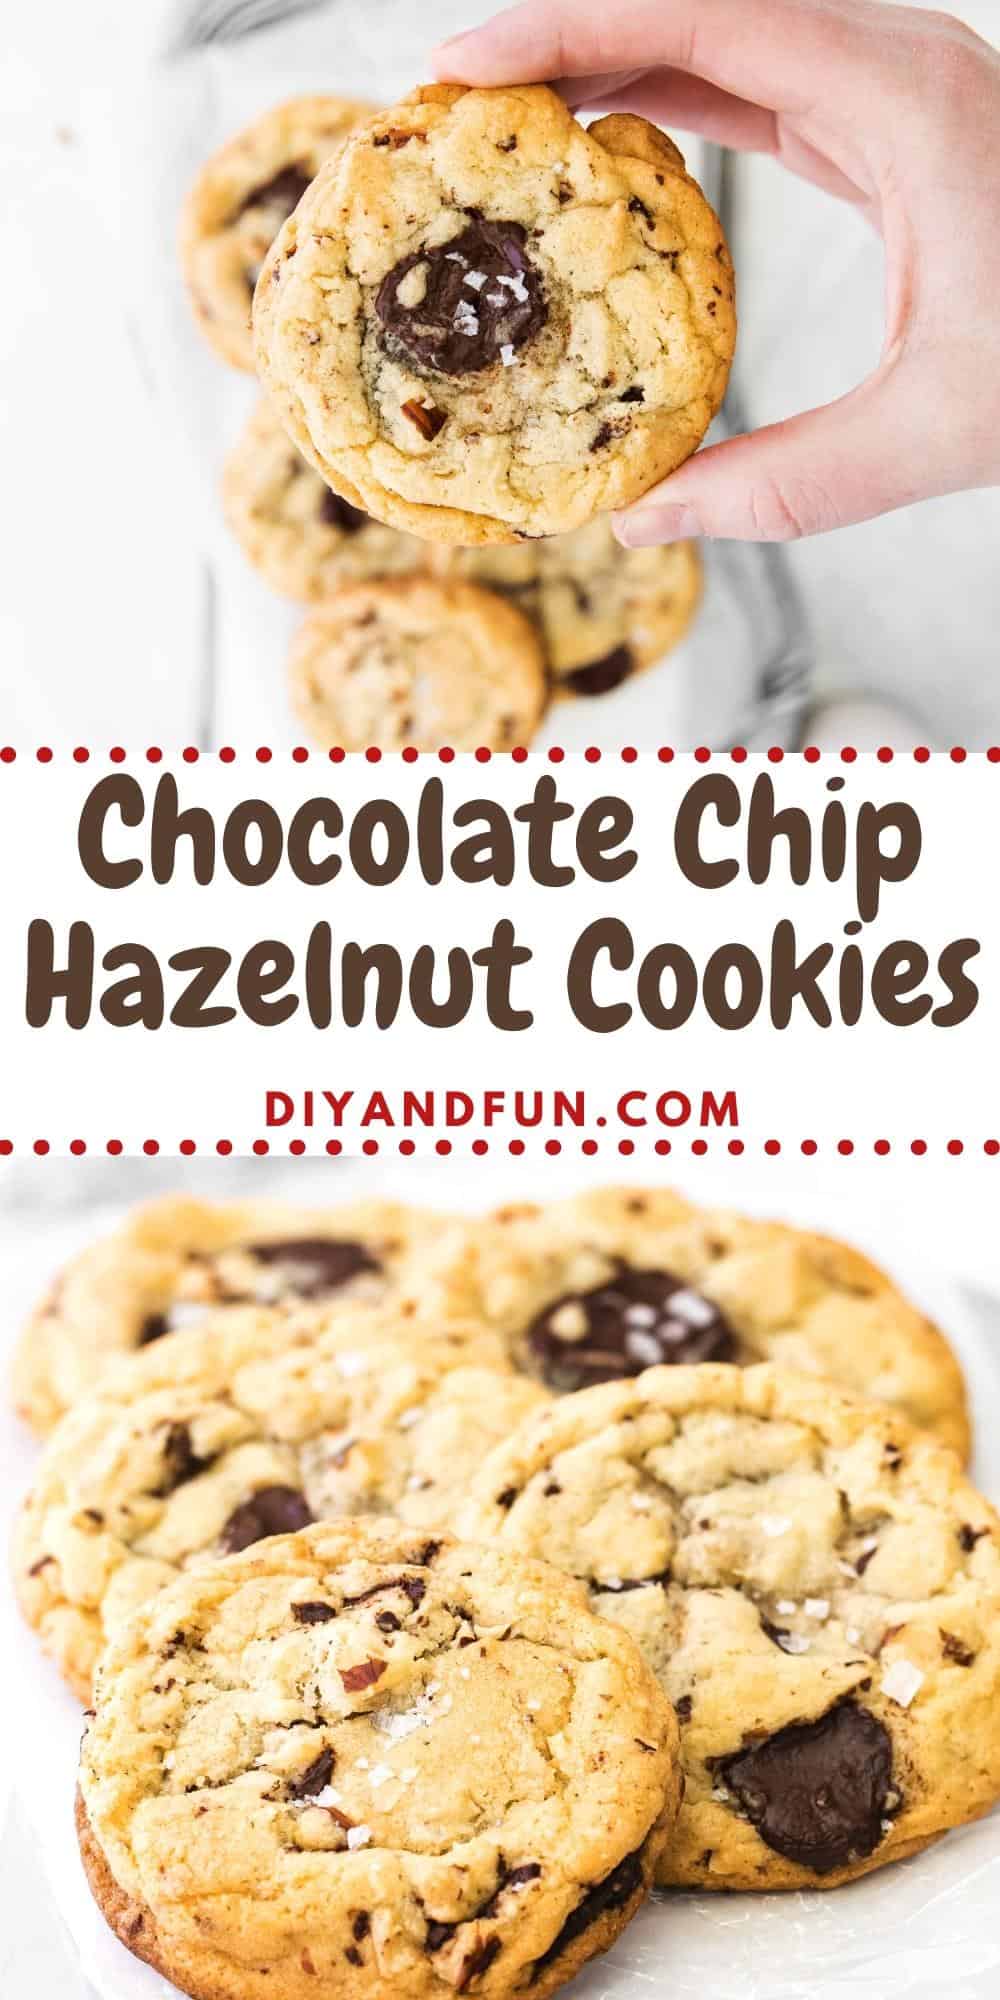 Chocolate Chip Hazelnut Cookies, A tasty homemade cookie recipe featuring chocolate chips and chunks with hazelnuts.